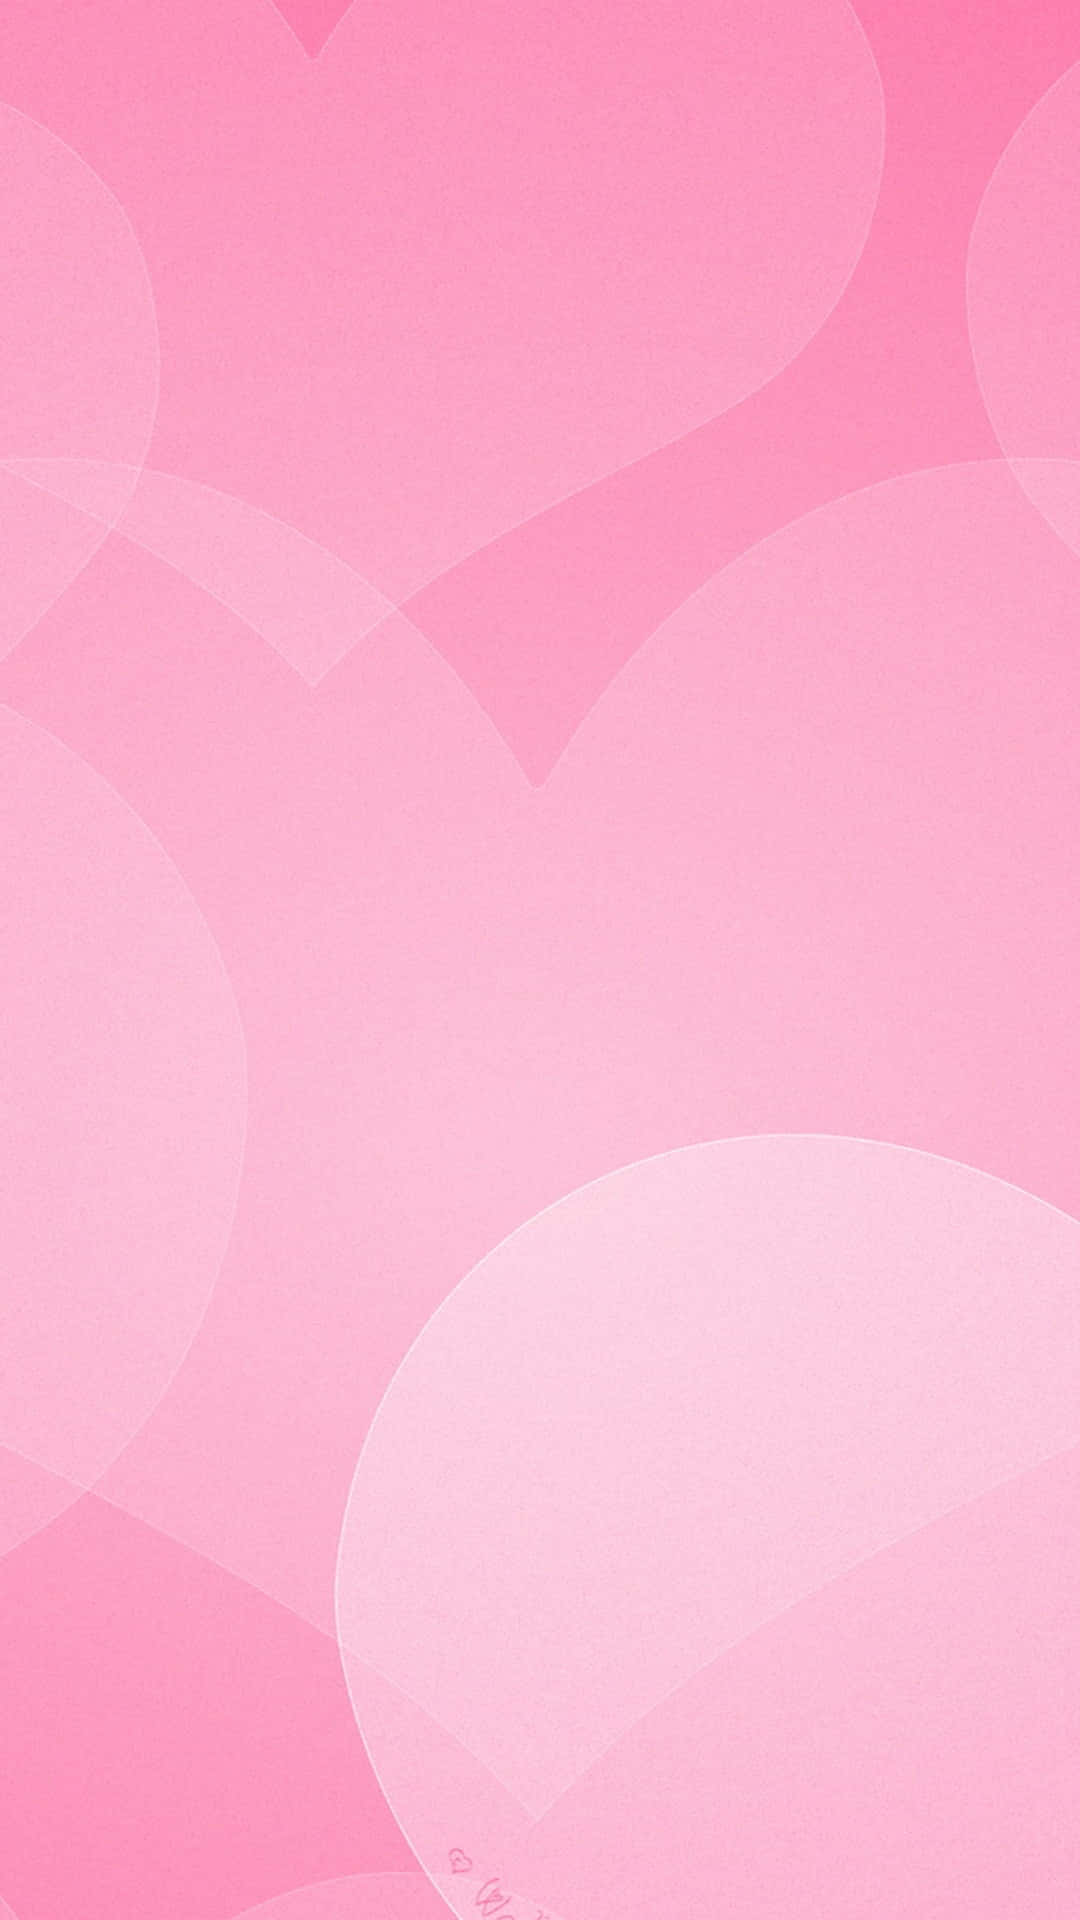 A Pink Background With Hearts